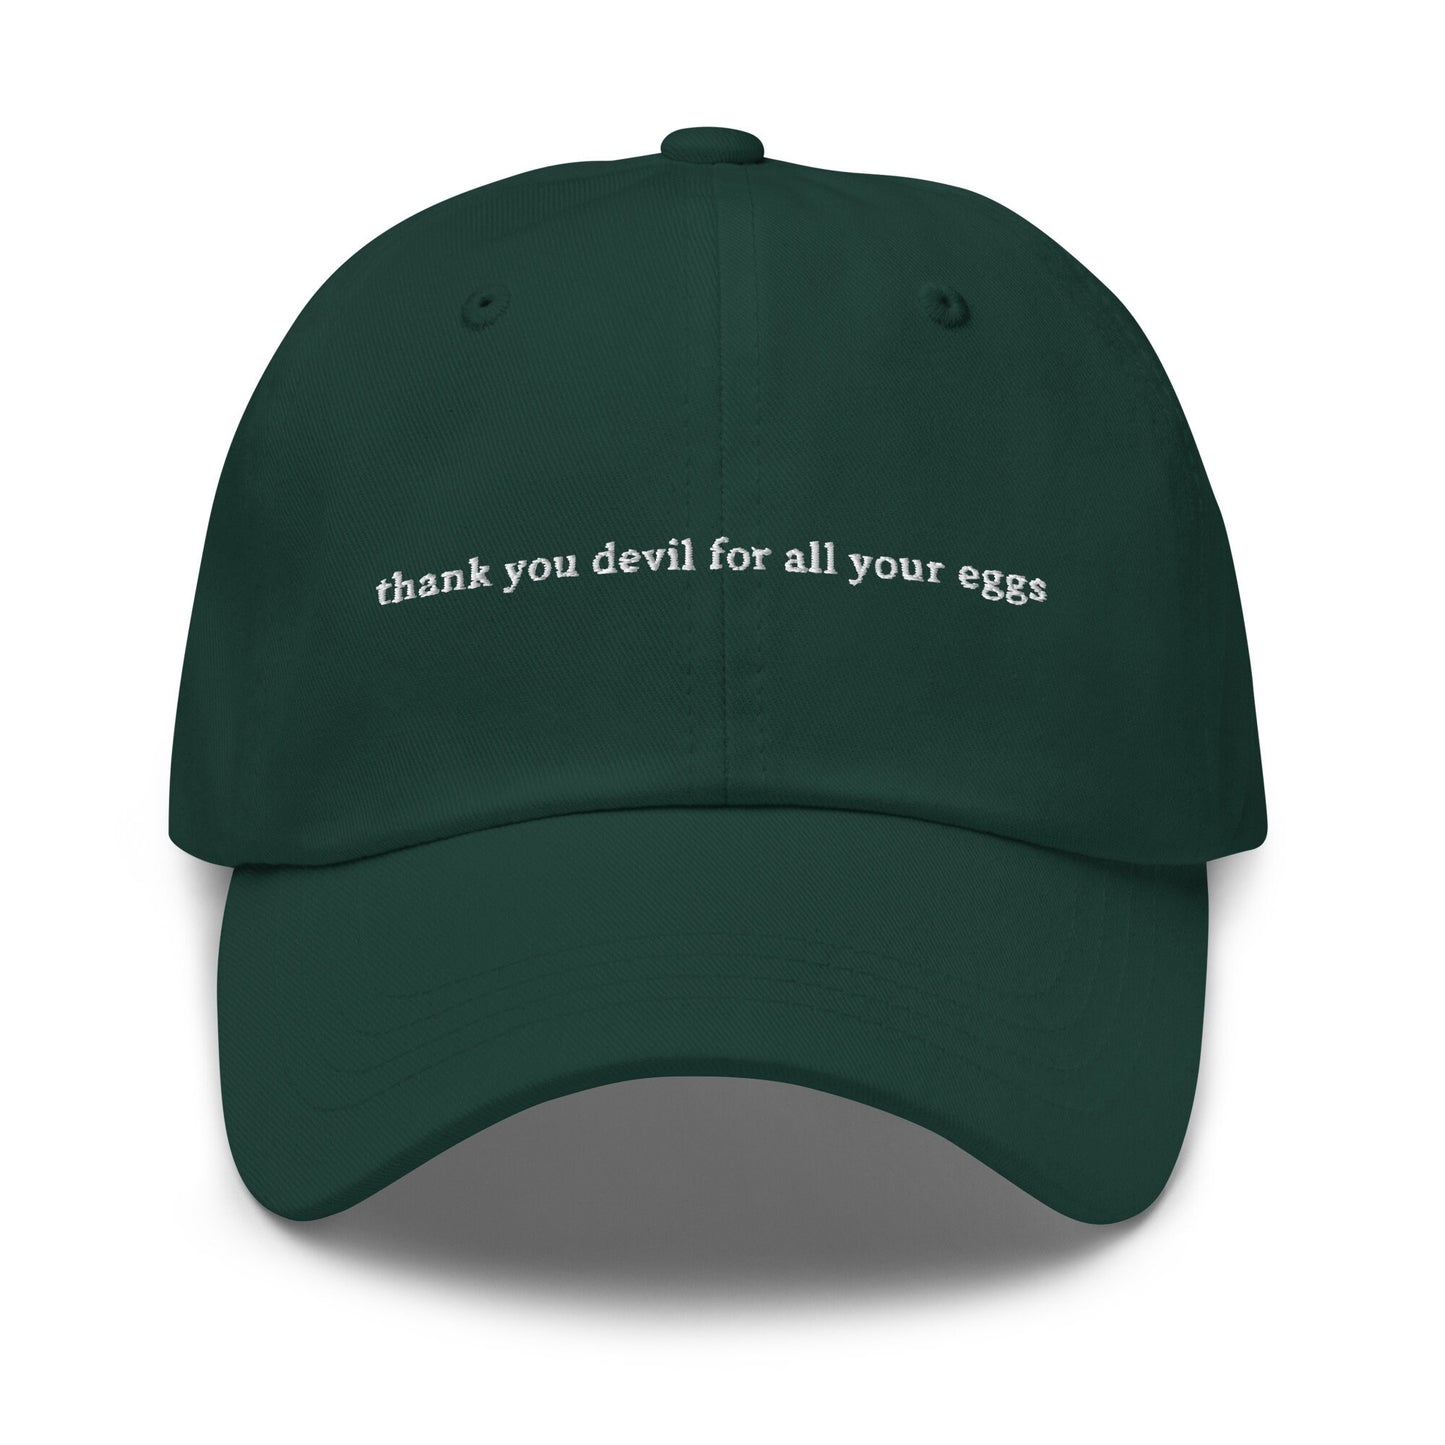 Deviled Eggs Hat - Delicious Egg Gifts From Below - Mayo Lovers Gift - Embroidered Cotton Baseball Cap